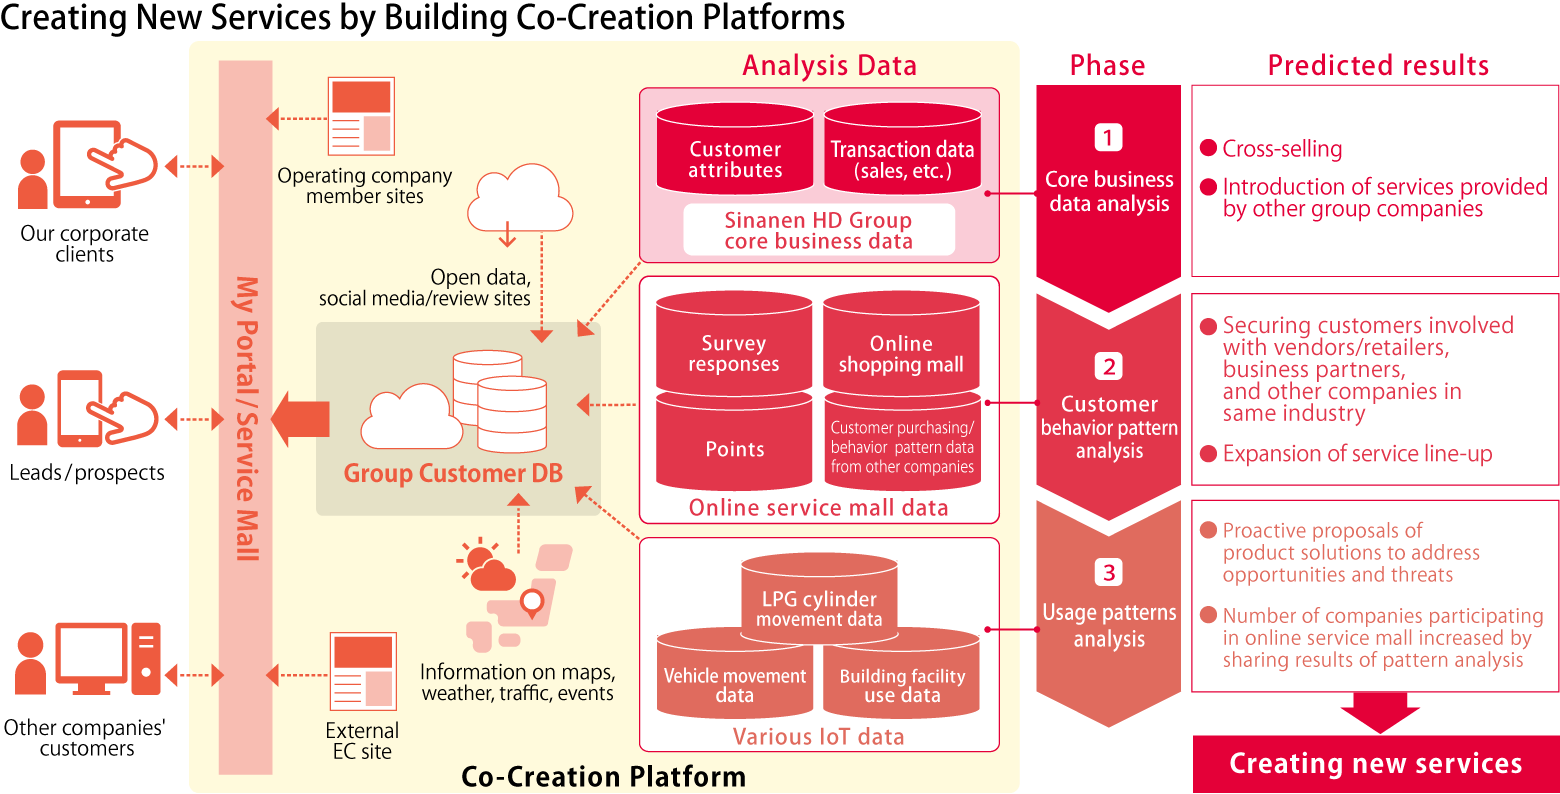 Creating New Services by Building Co-Creation Platforms